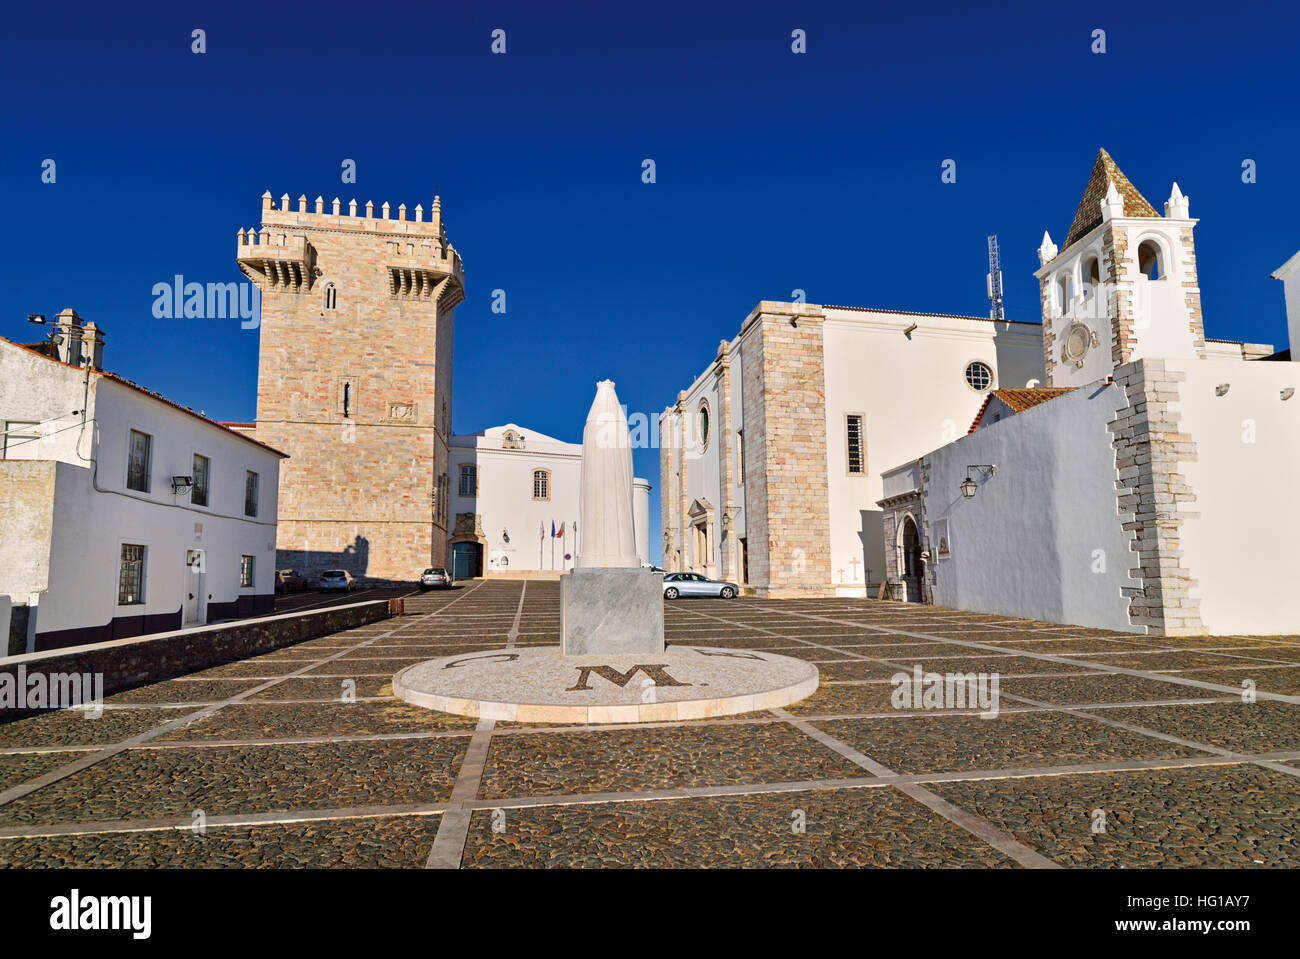 Portugal: Patio in the historic part of marble town Estremoz with tower and Palace Rainha Santa Isabel Stock Photo